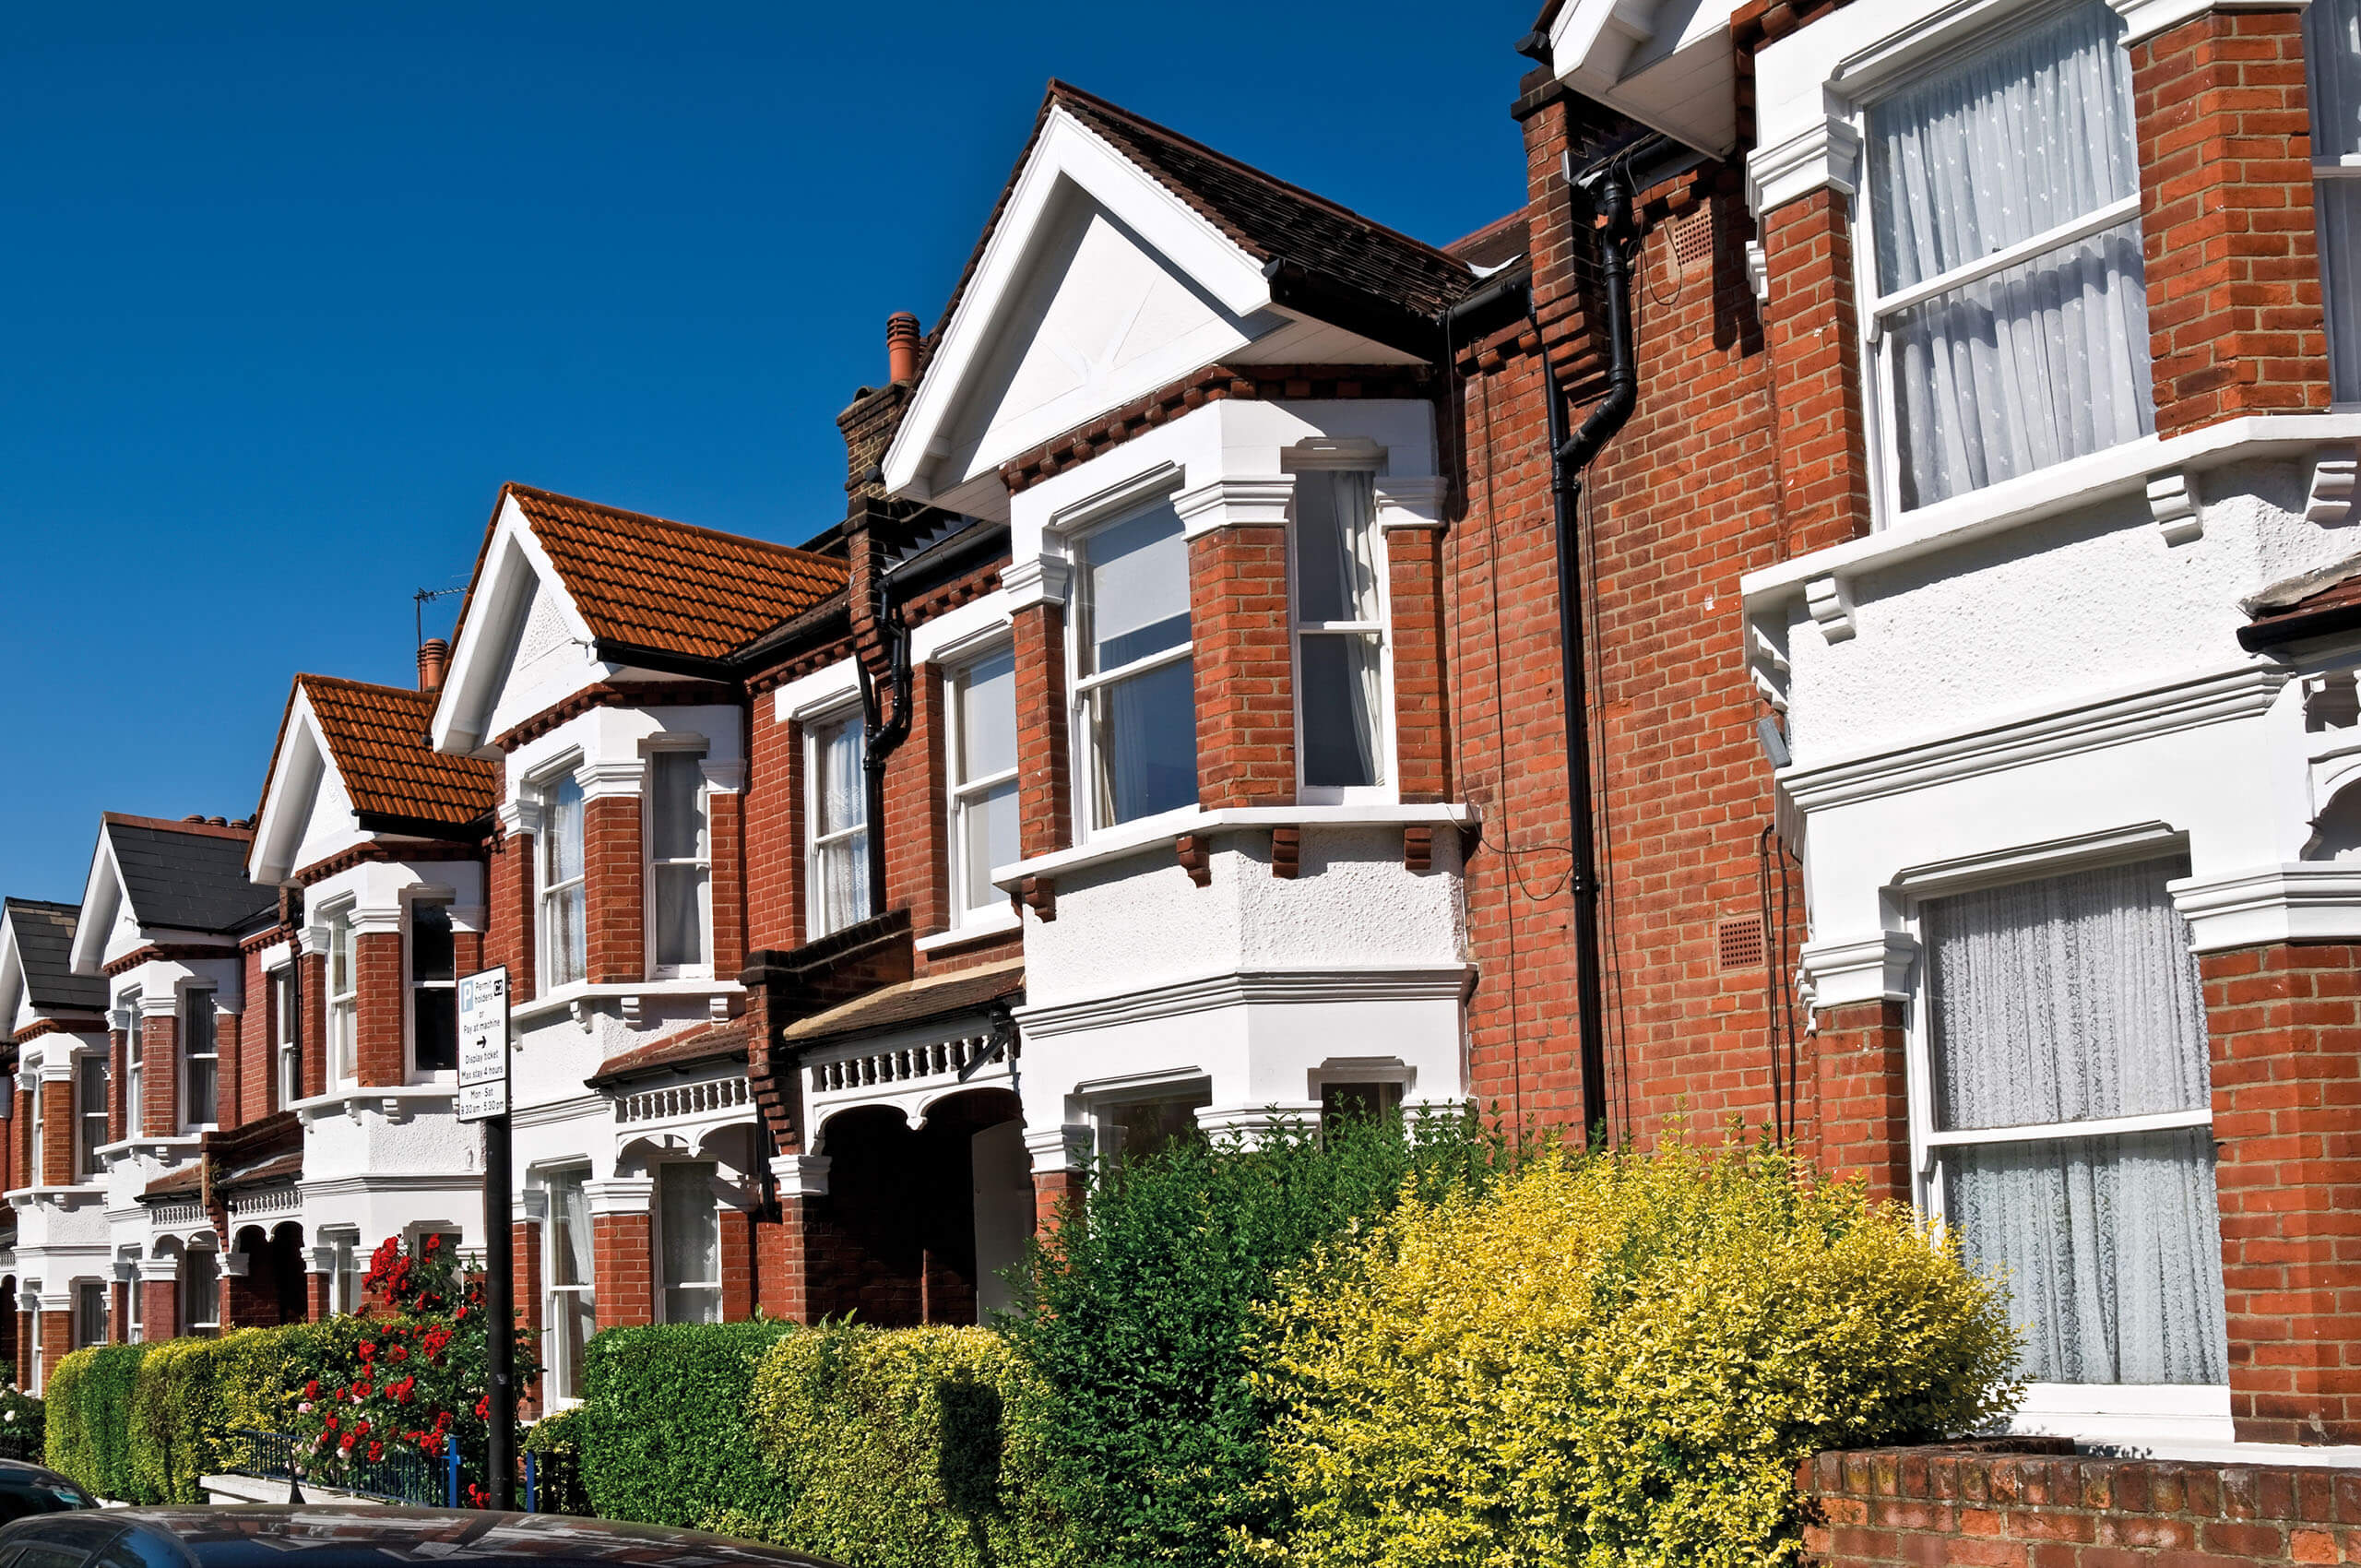 A row of Edwardian terraced houses in the sunshine